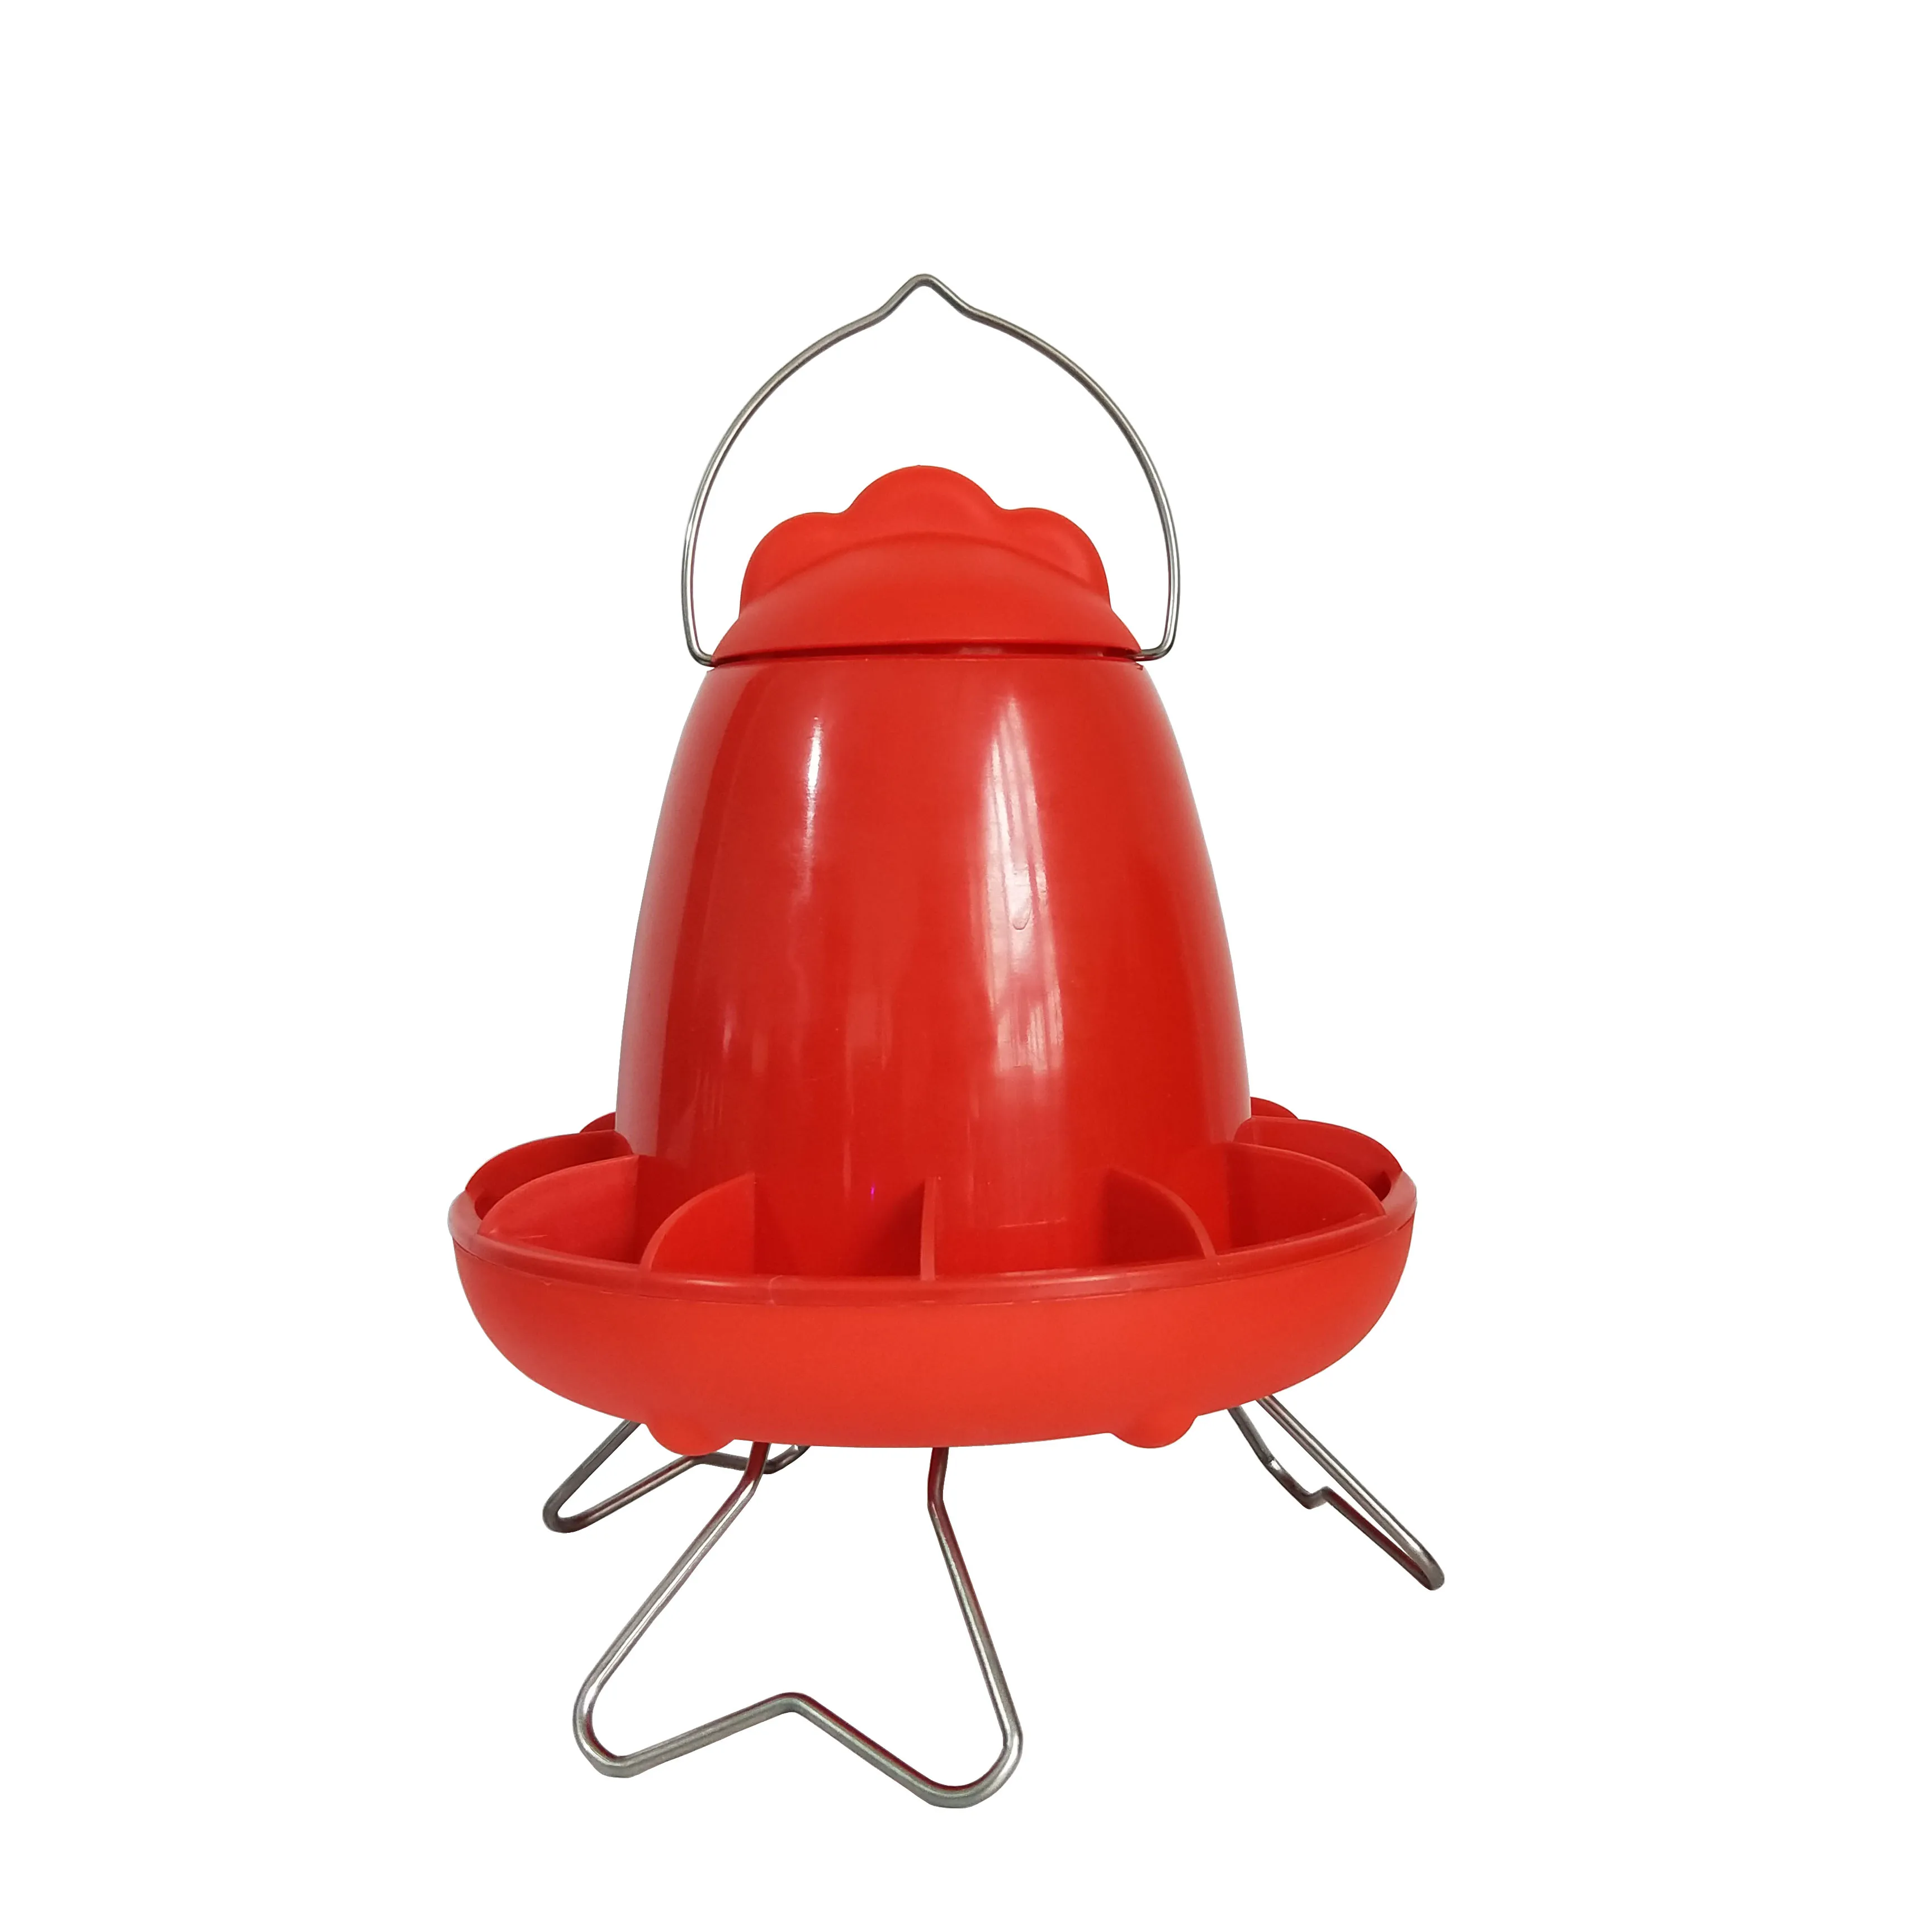 new design 1.5kg Poultry Feeding Equipment Brolier Water Drinker And Feeder Plastic Chicken Waterer with stand PH 162